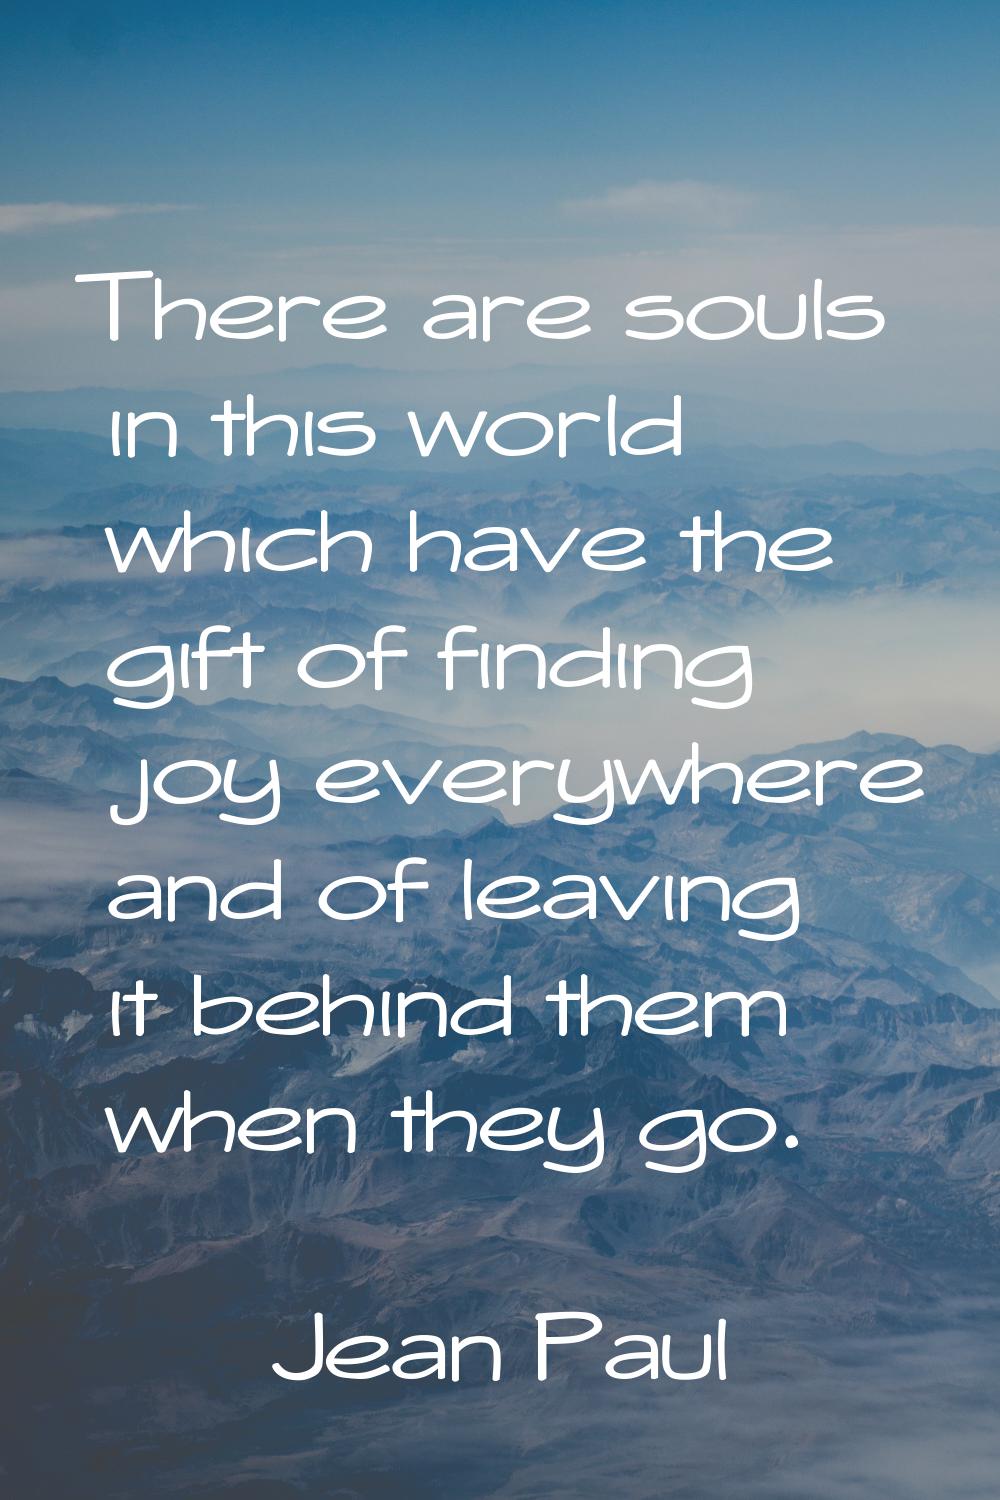 There are souls in this world which have the gift of finding joy everywhere and of leaving it behin